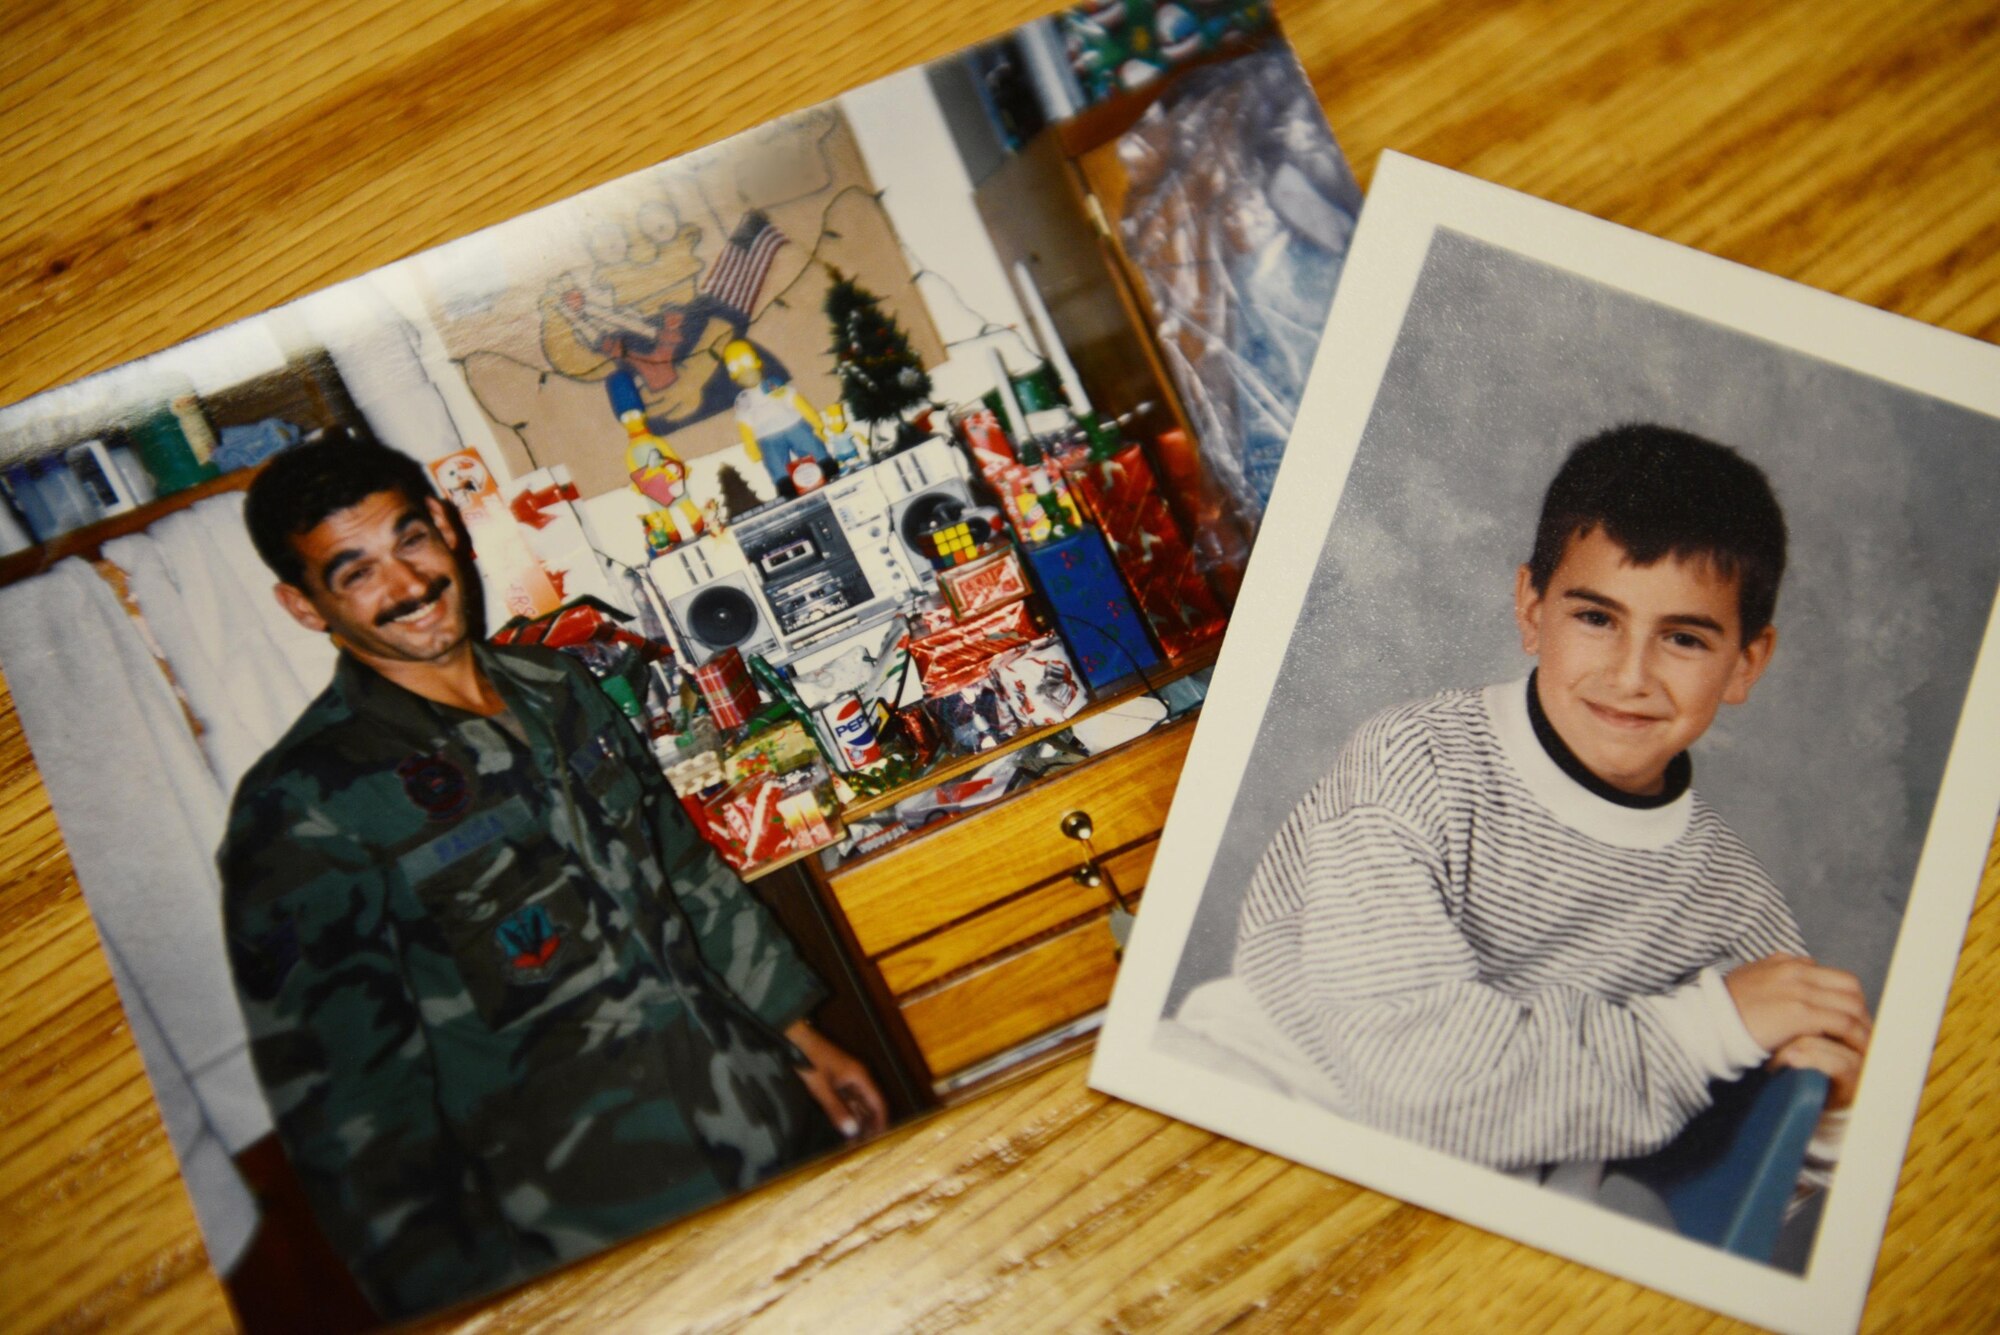 While deployed to Operation Desert Storm in 1990, retired Master Sgt. Ben Rausa and then 8-year-old Stephen Rausa, (not related) began exchanging letters. (U.S. Air Force photo/Mike Raynor)